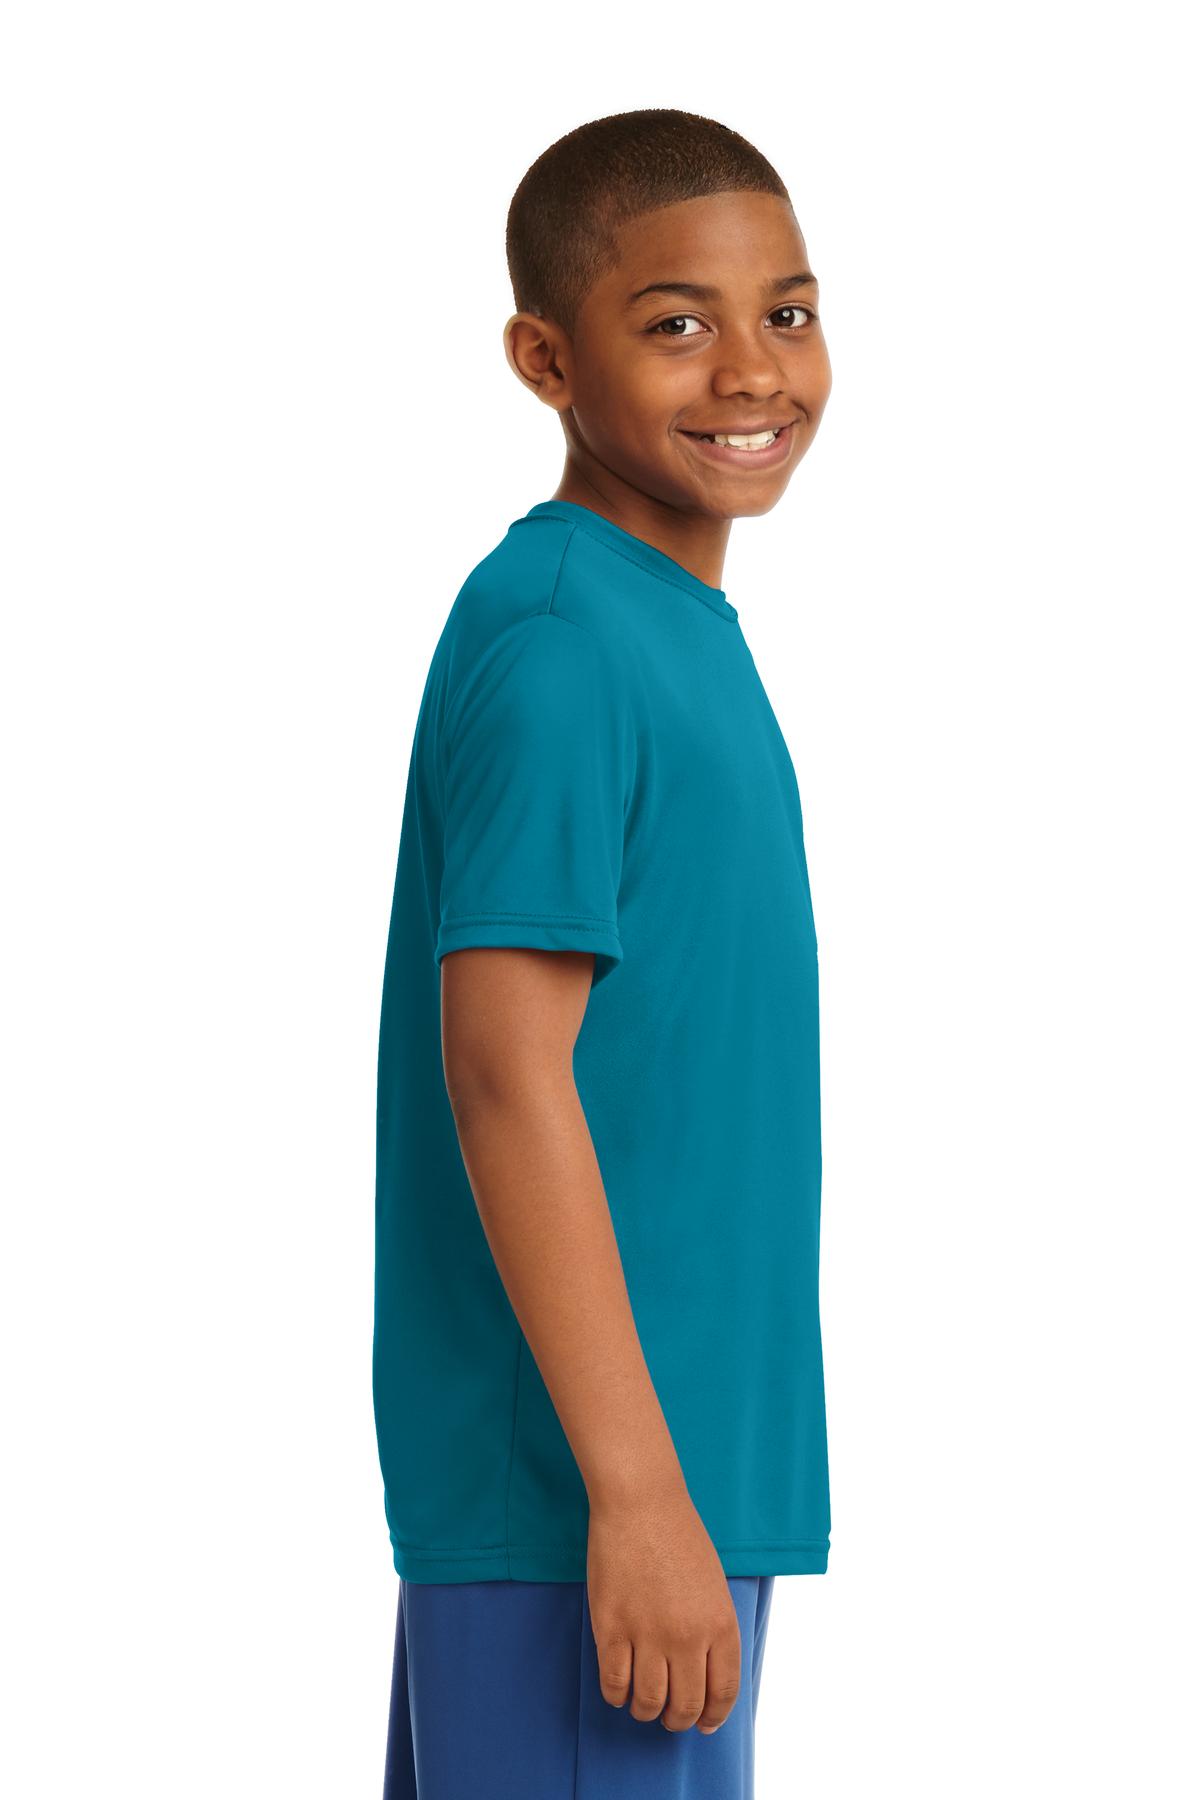 Sport-Tek® Youth PosiCharge® Competitor™ Tee. YST350 [Tropic Blue] - DFW Impression